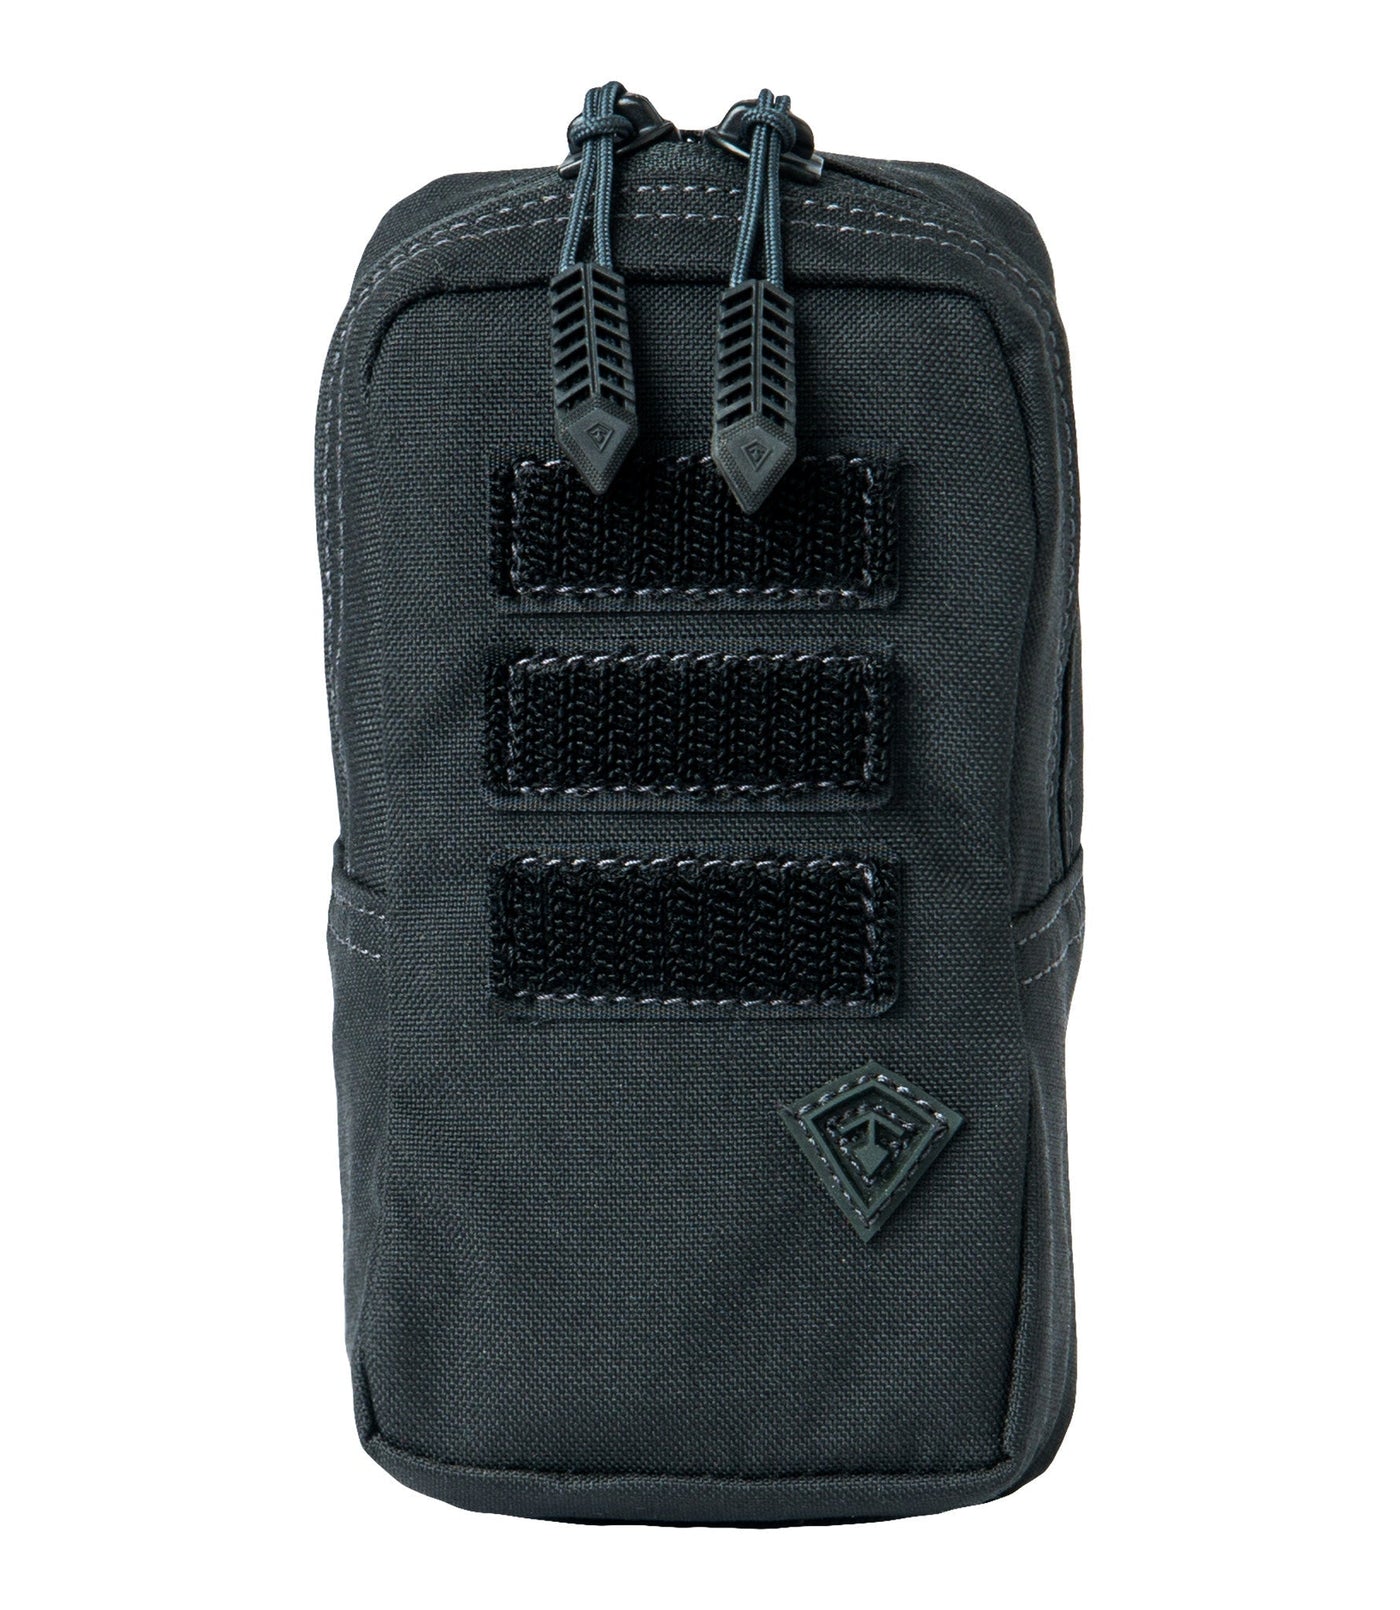 Front of Tactix Series 3x6 Utility Pouch in Black